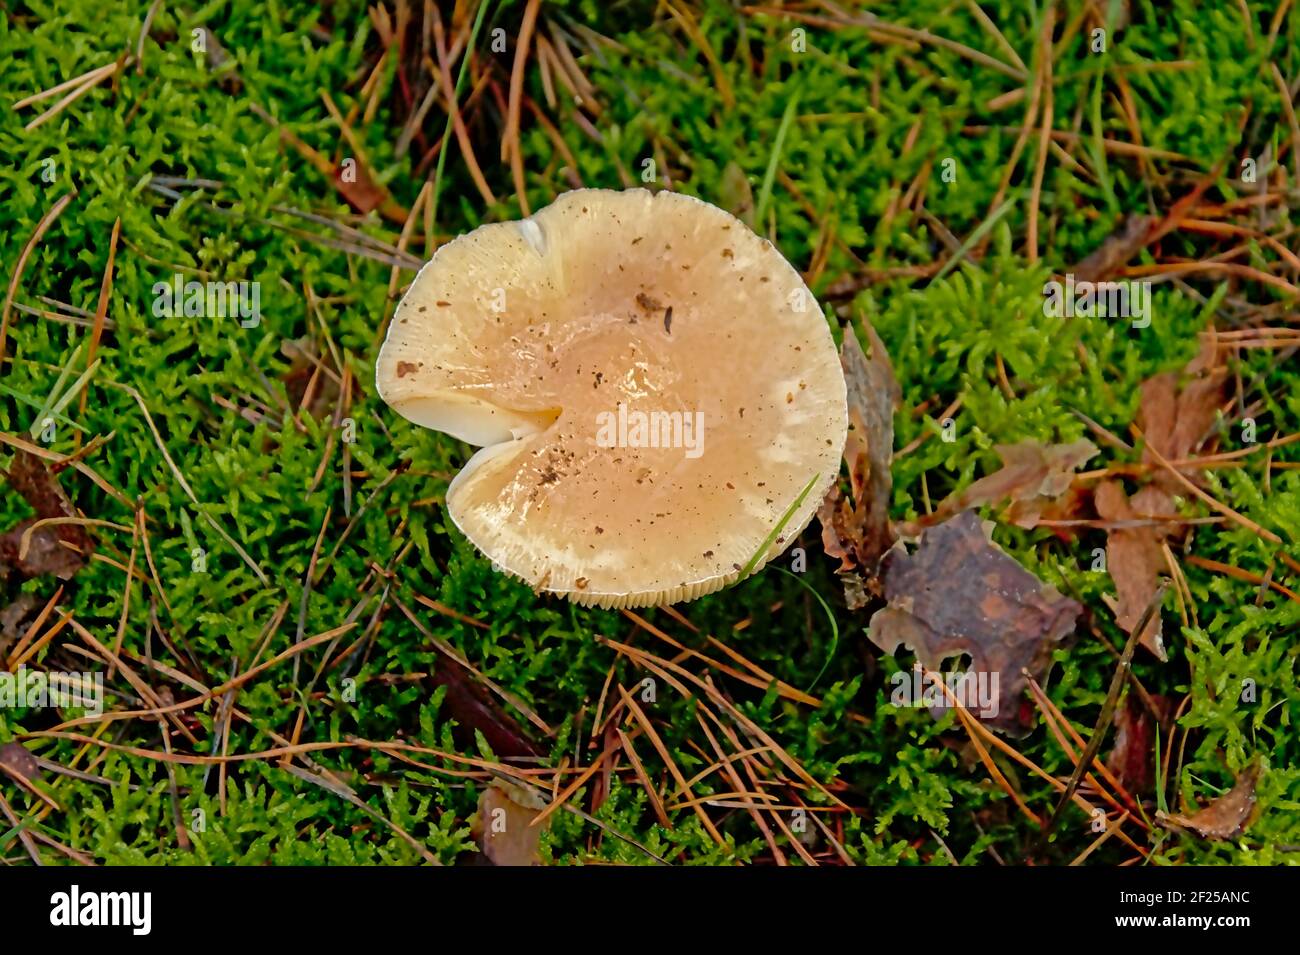 Shiny wet white russula mushroom in between moss on the forest floor, Stock Photo